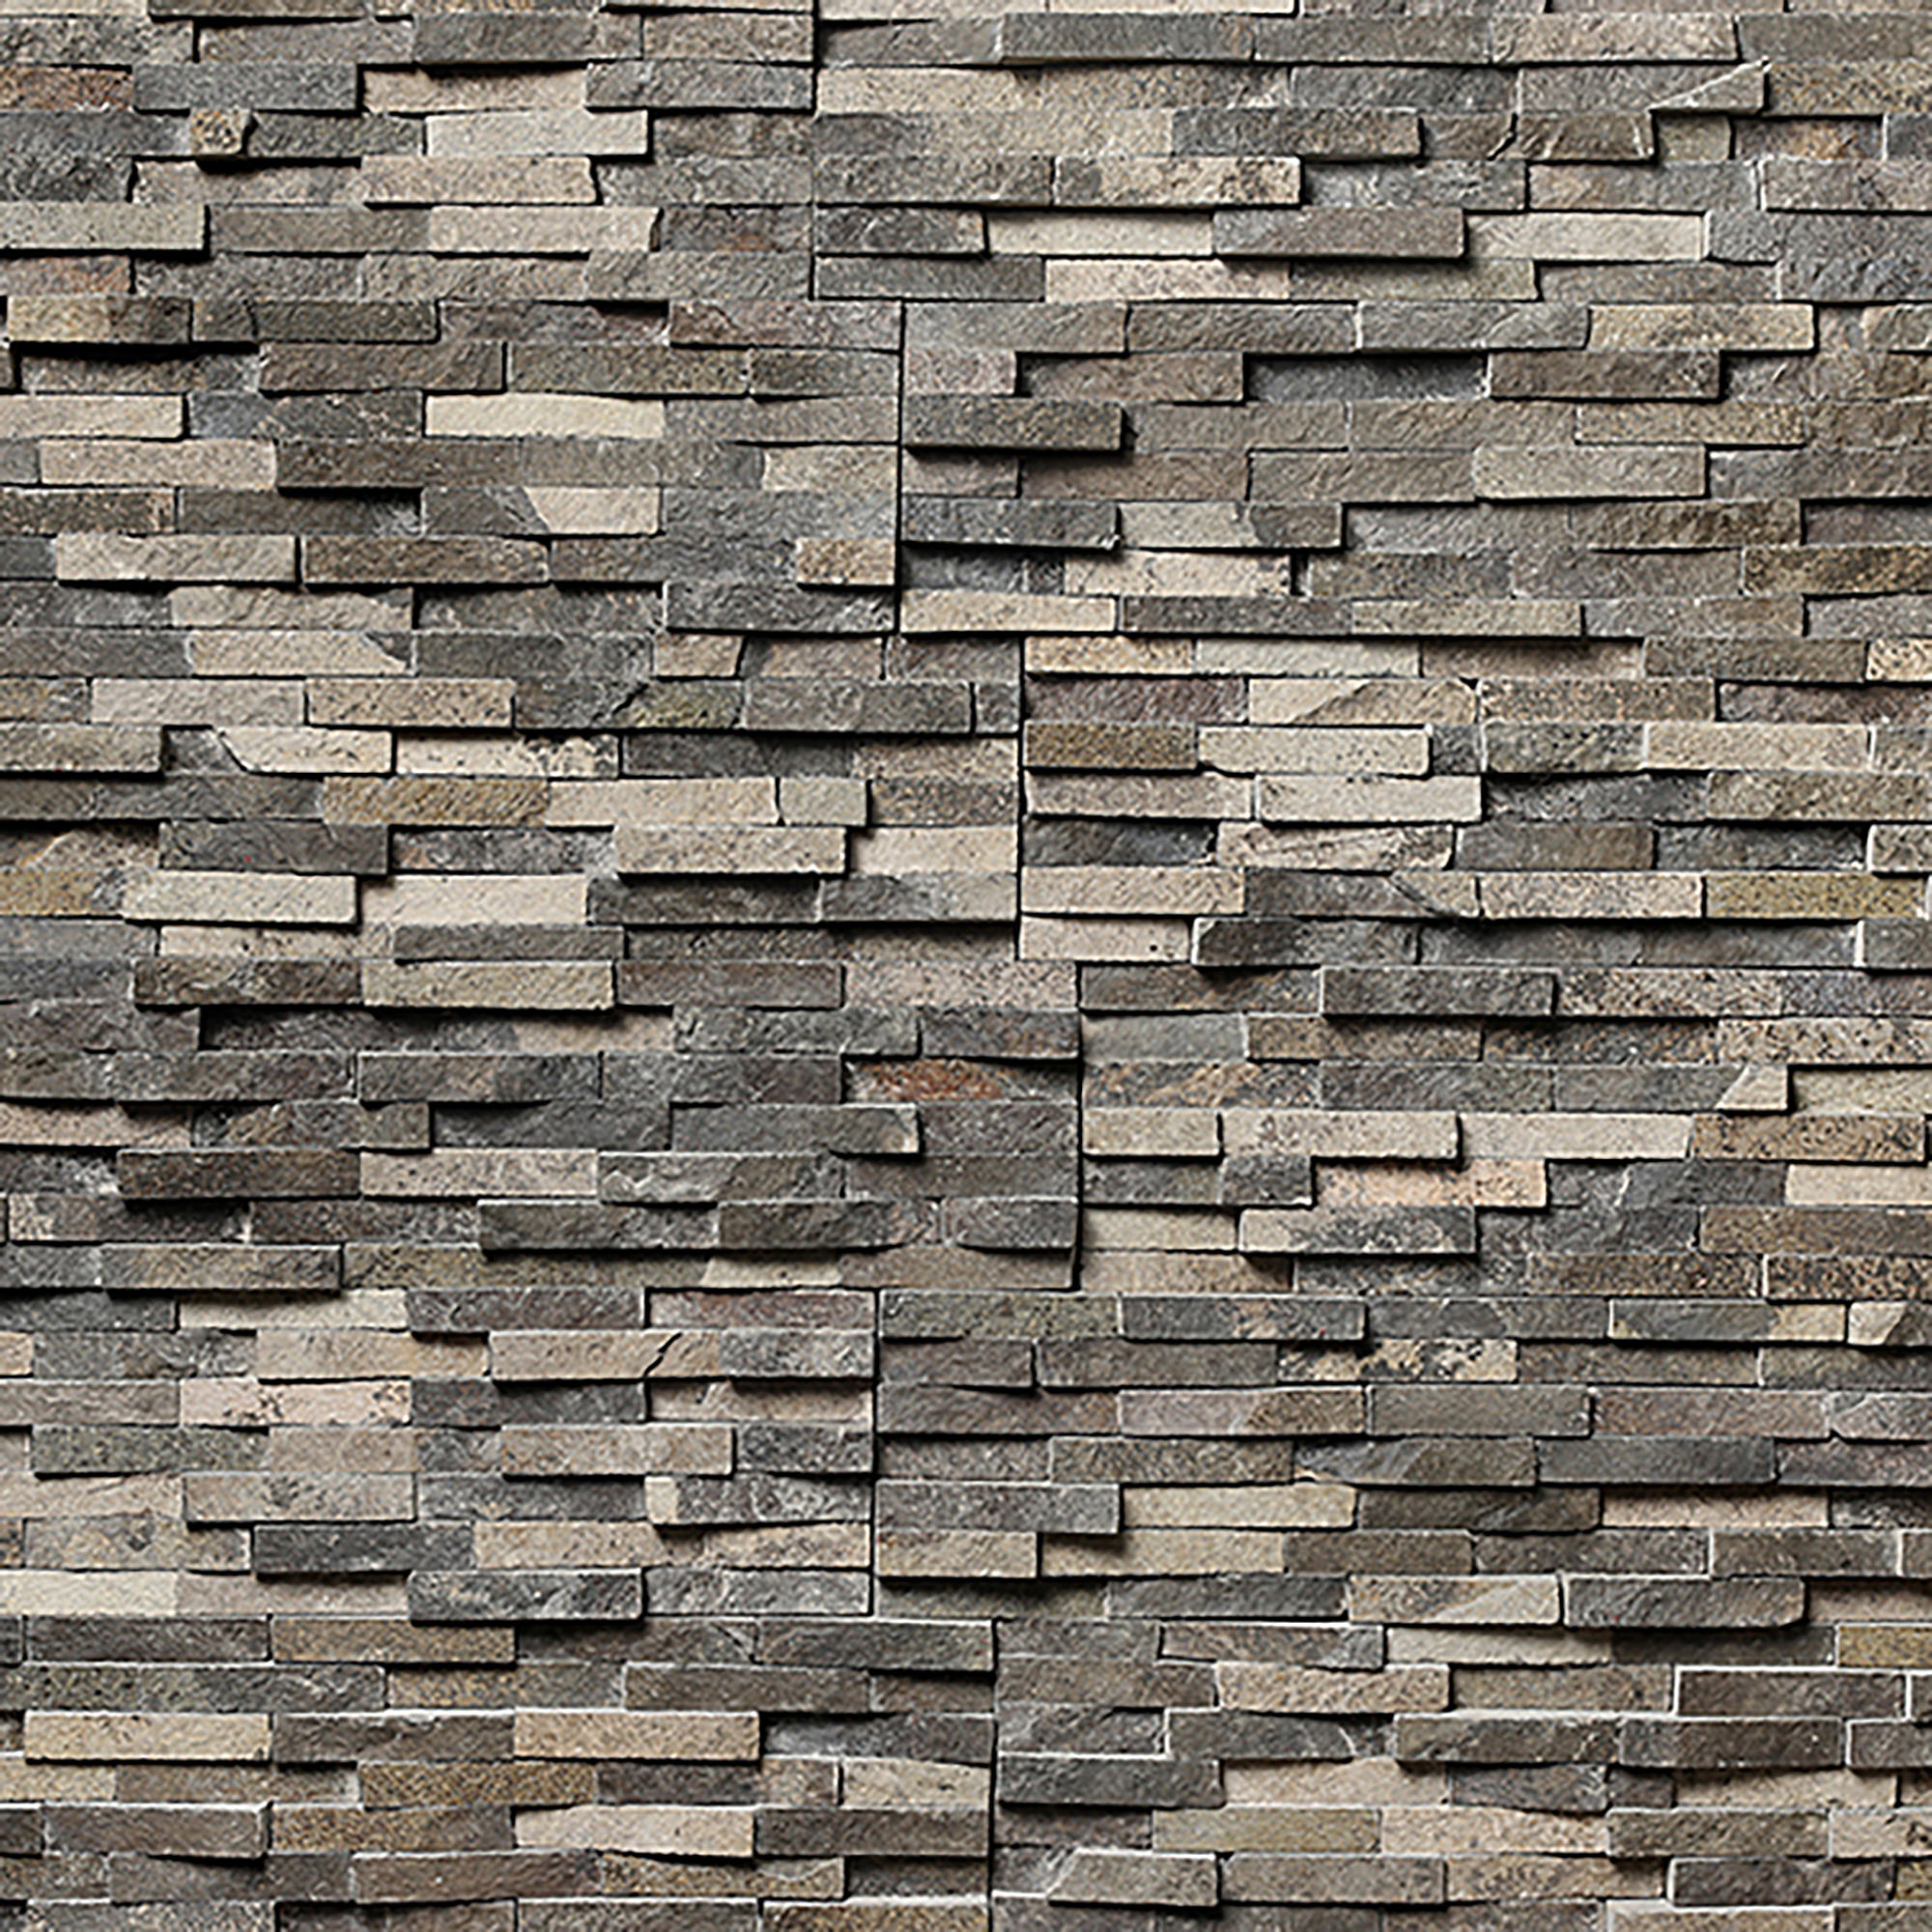 Citali Series Eos 6 x 24 Natural Stacked Stone Panel